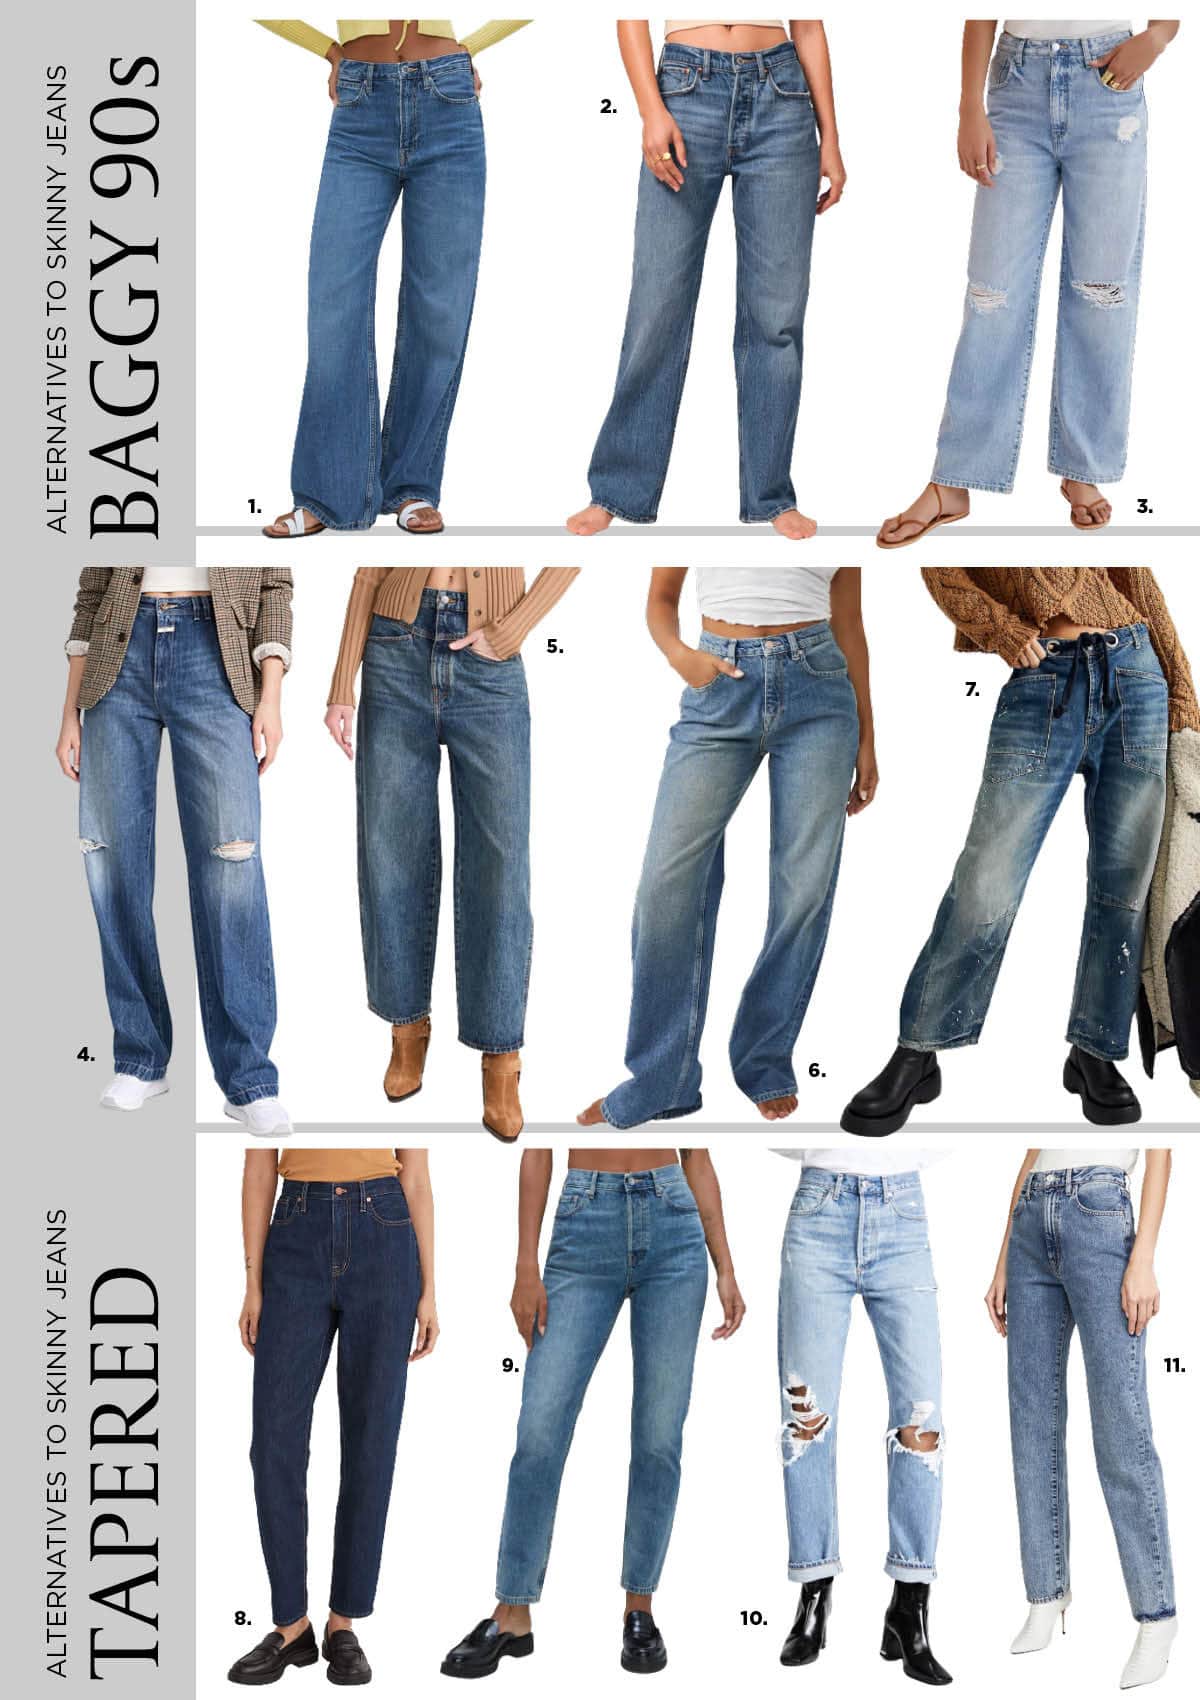 What to wear instead of skinny jeans? baggy 90s jeans and the latest trend tapered leg jeans